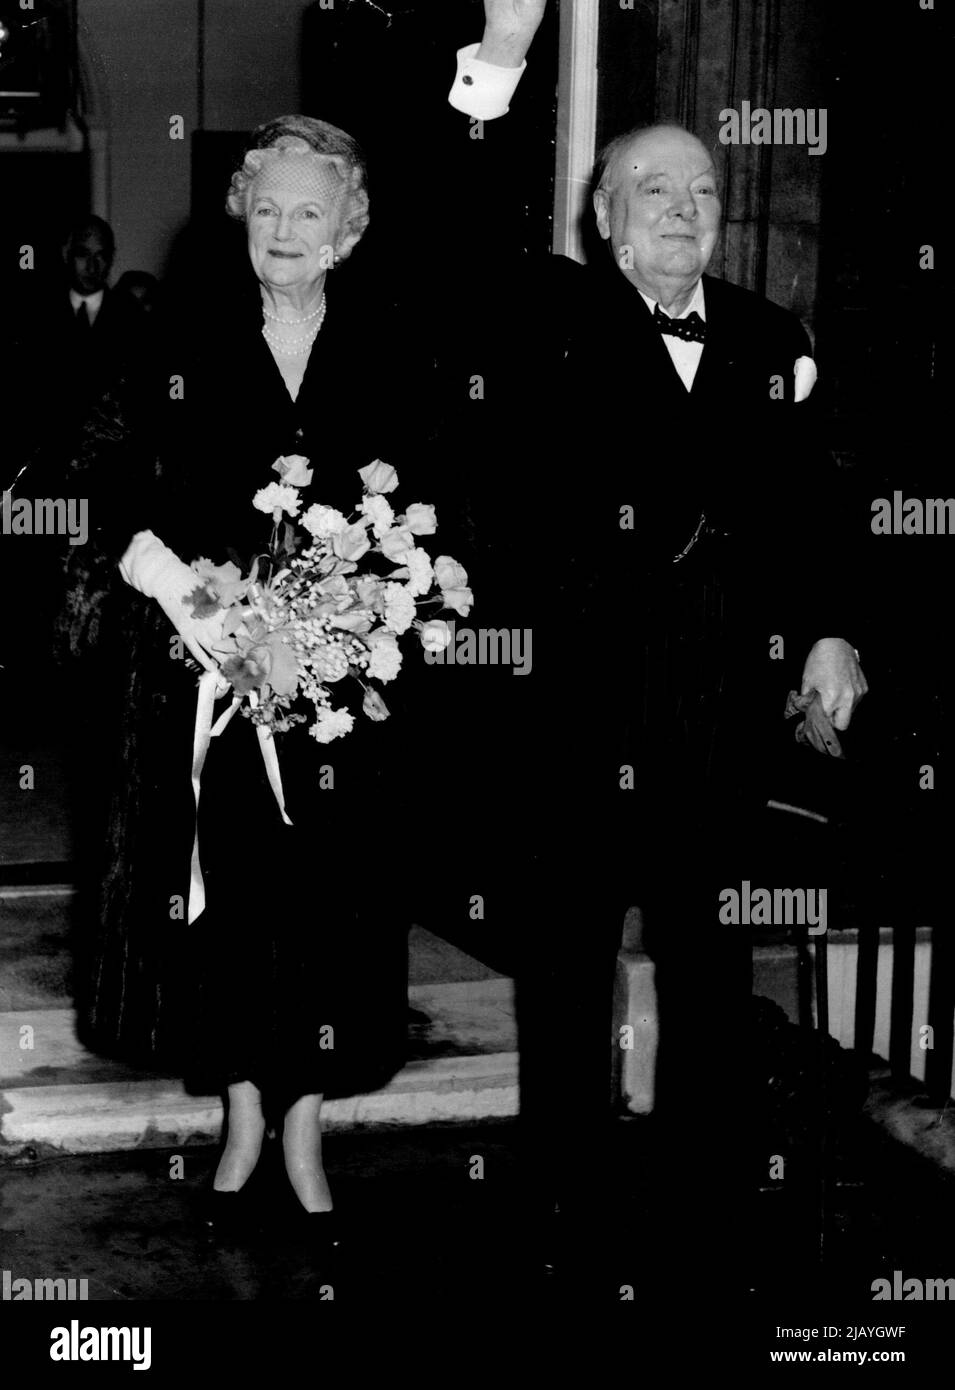 And The Crowds Cheered and Cheered : Back at No. 10 Downing Street after the Westminster Hall ceremony, Sir Winston Churchill full of emotion, acknowledges the crowds cheers. Smiling happily at his side is Lady Churchill. November 30, 1954. (Photo by Evening Standard Picture). Stock Photo